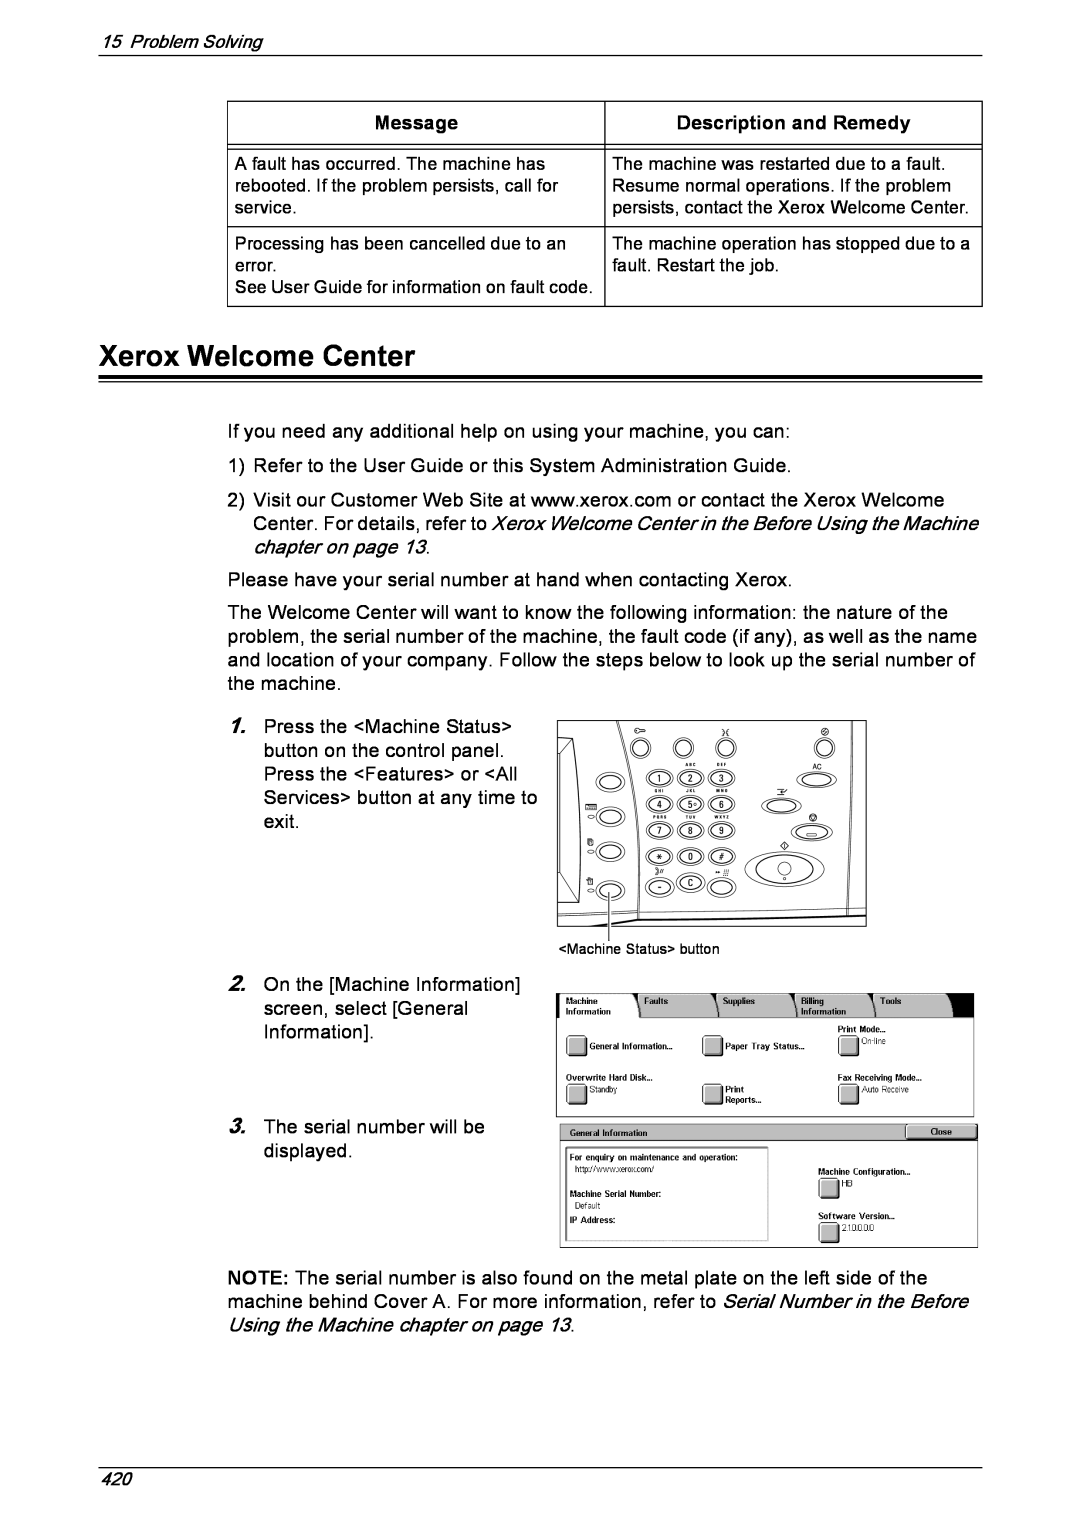 Xerox 5222 manual Xerox Welcome Center, Message, Description and Remedy, The serial number will be displayed 